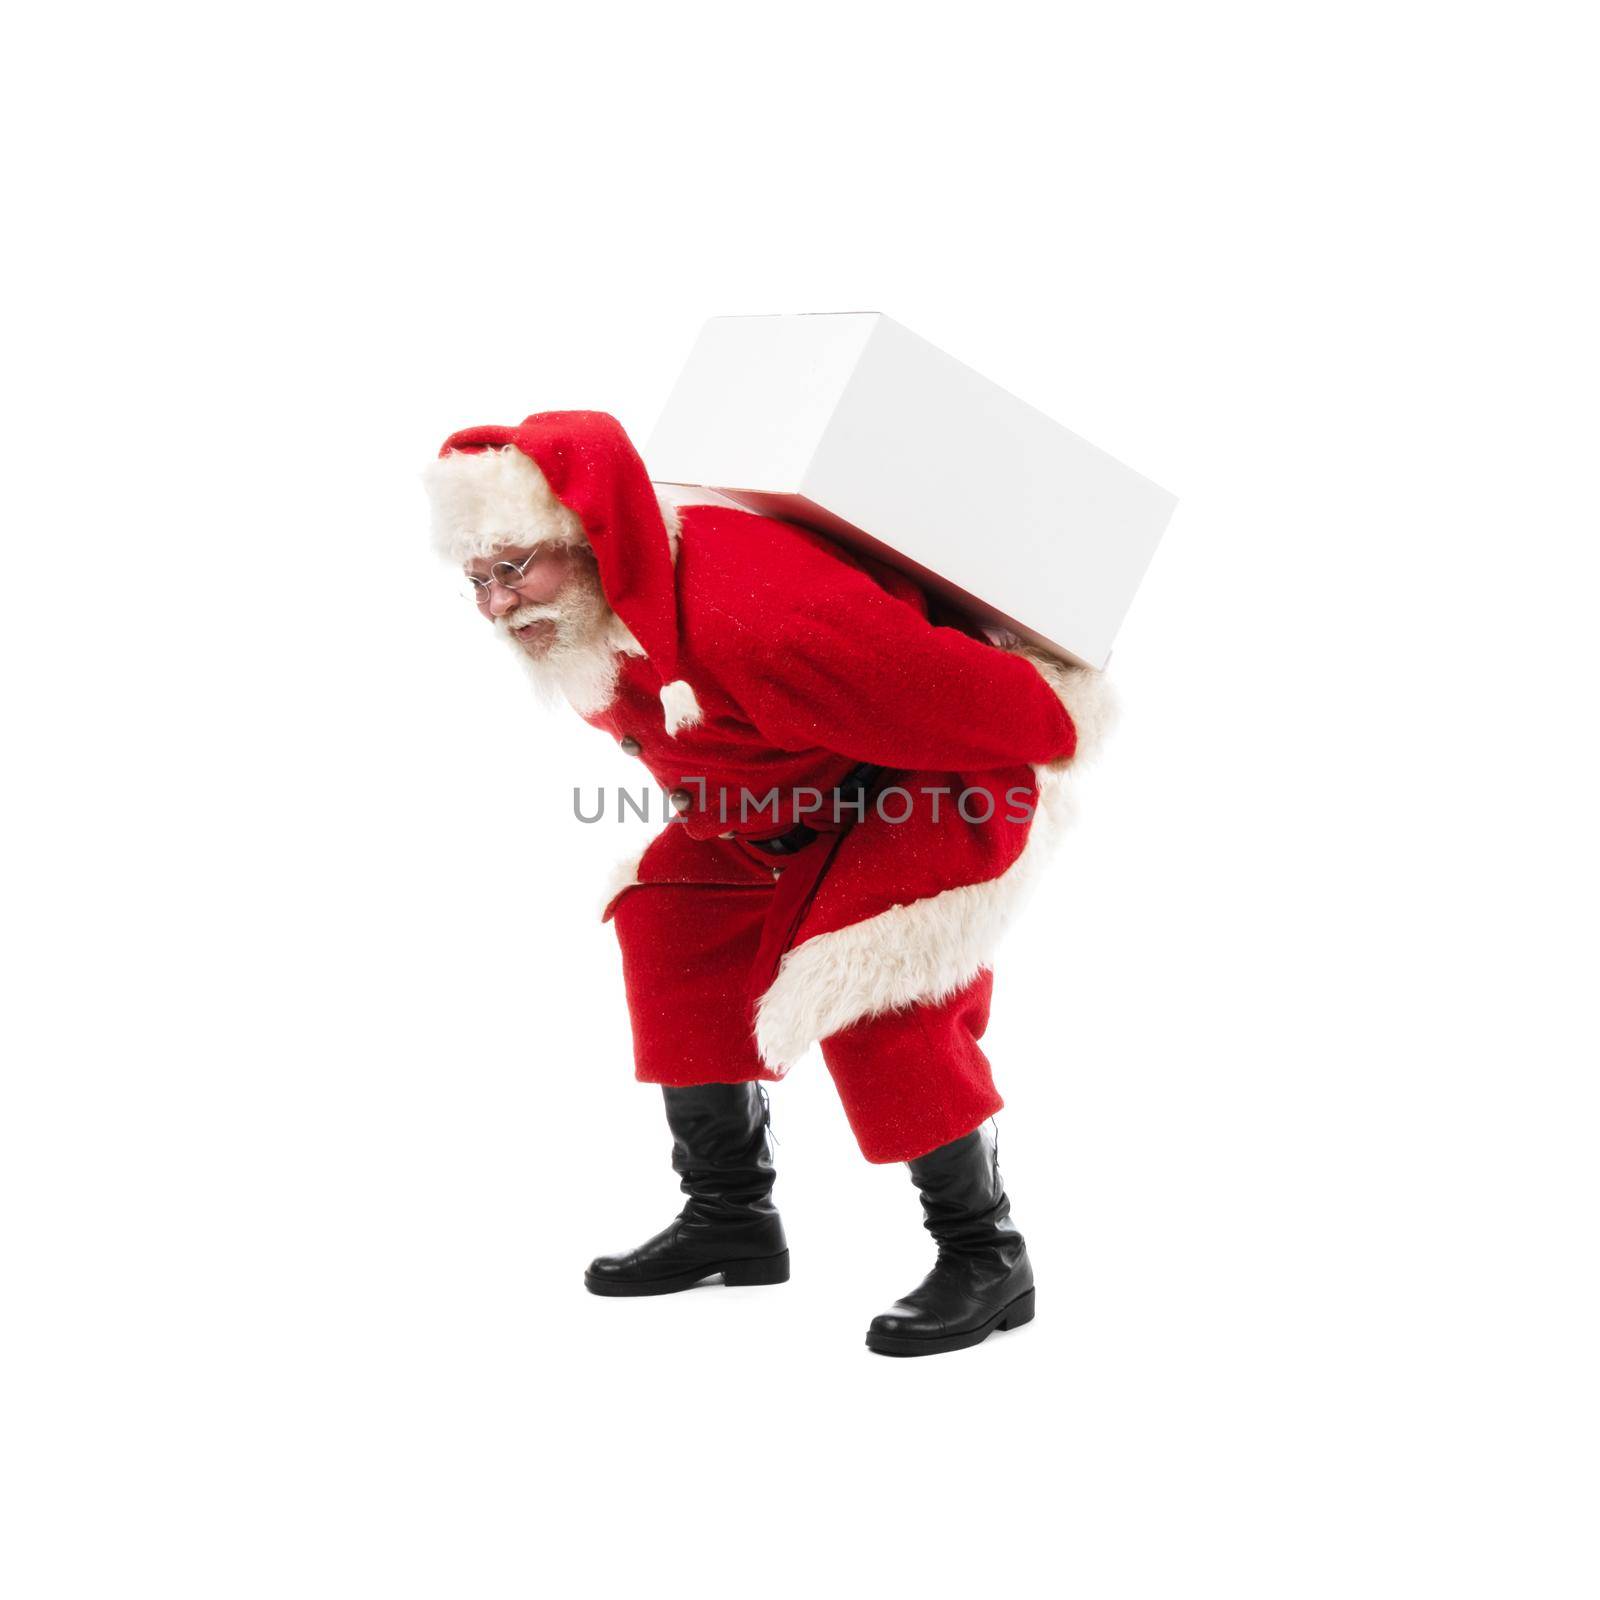 Santa Claus carrying large white gift boxe on his back isolated on white background